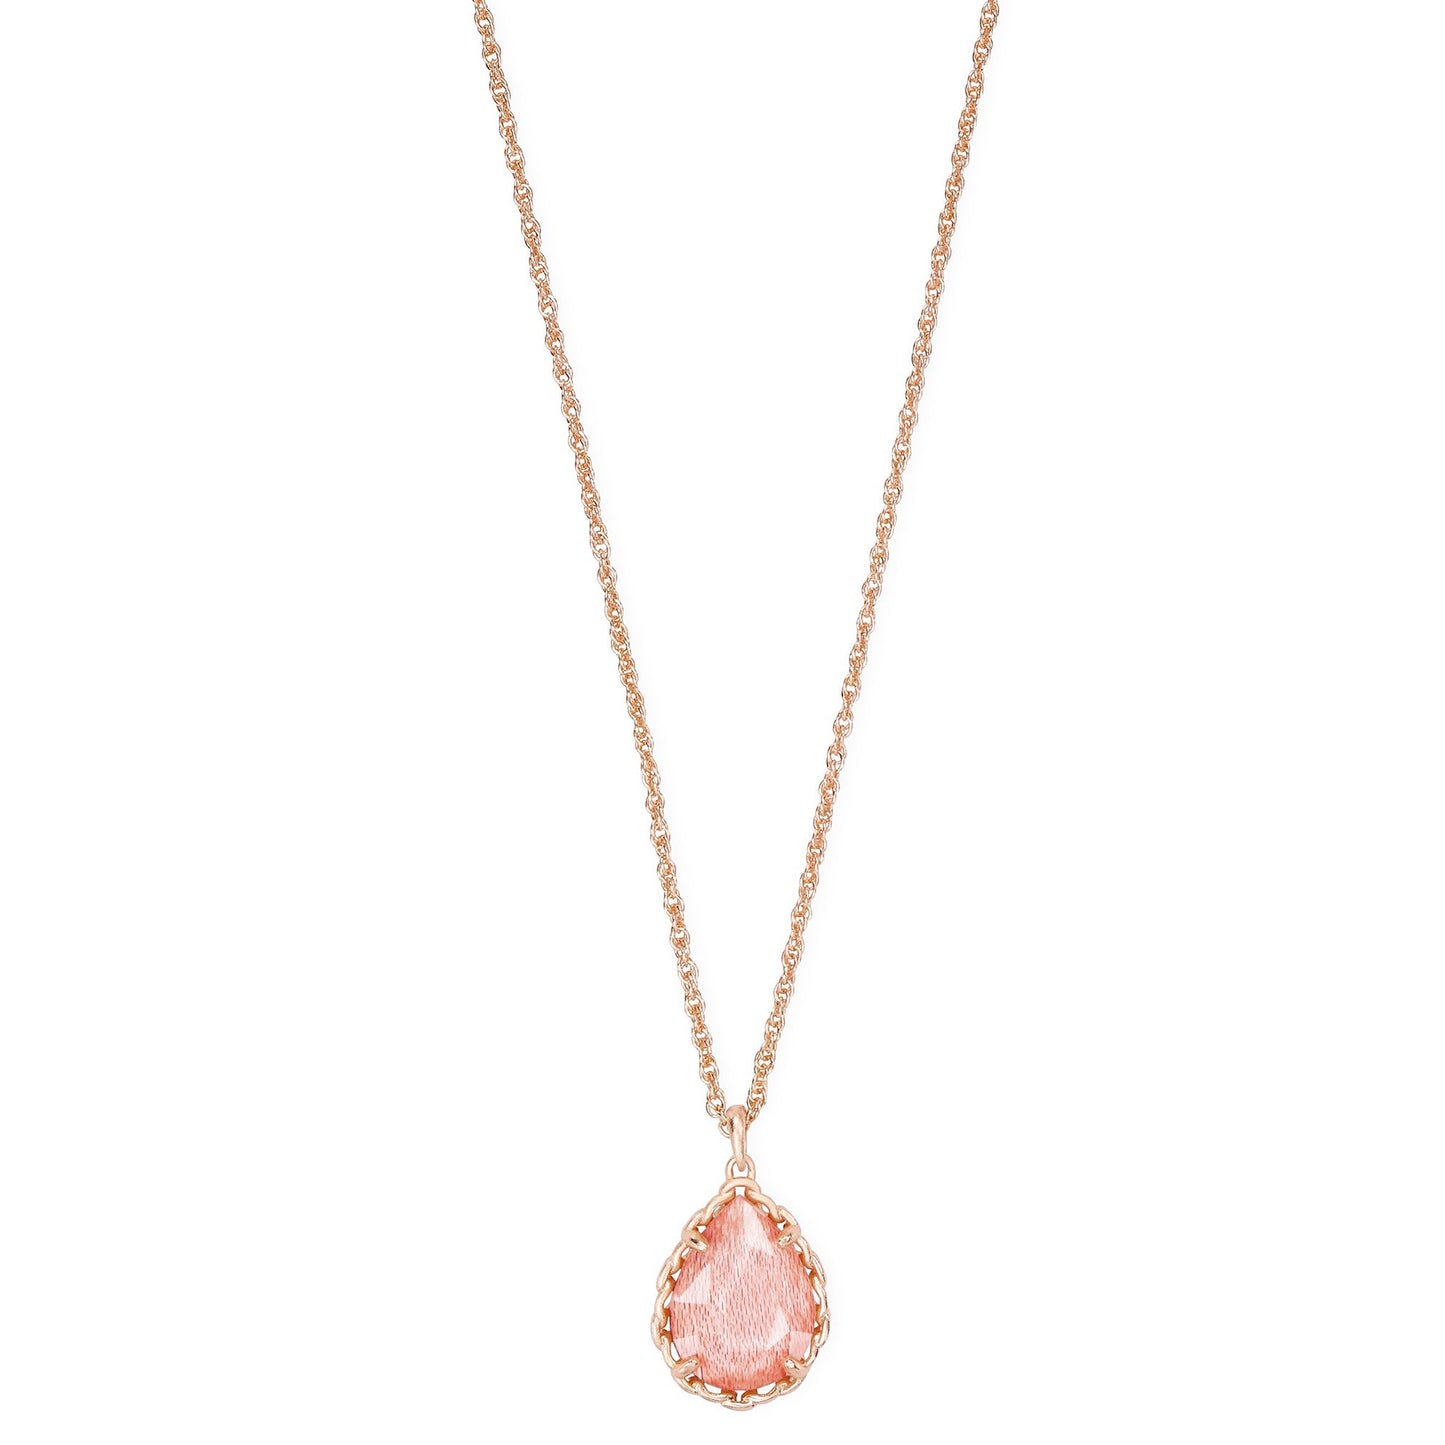 Macrame Dee Short Necklace in Rose Gold Blush Wood